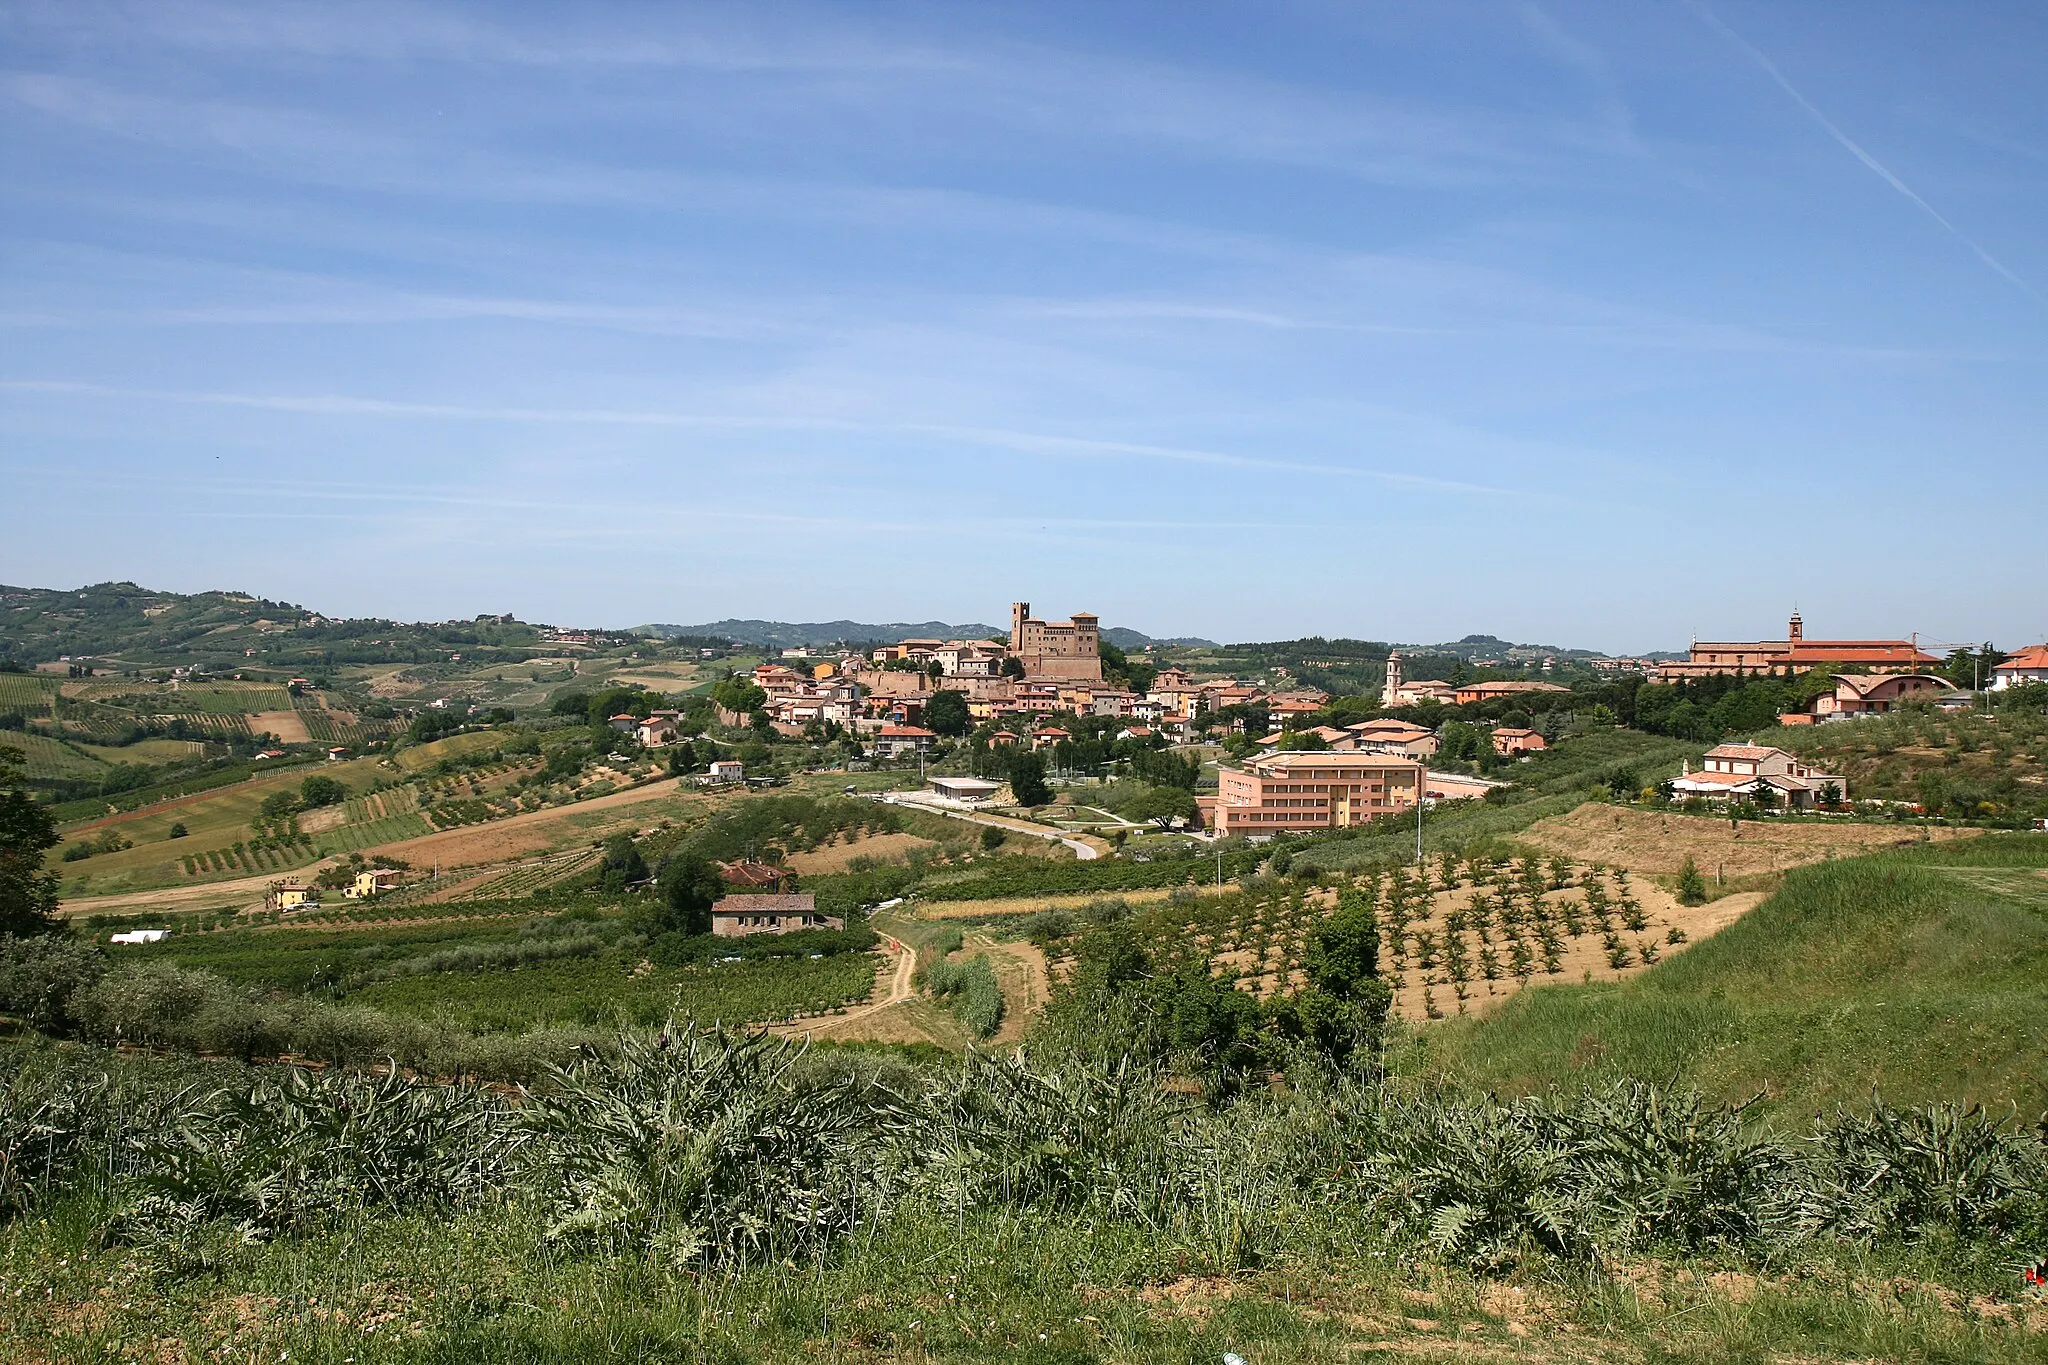 Photo showing: View from SE of Longiano and vicinity, Forlì Cesena Province, Emilia-Romagna Region, Italy.